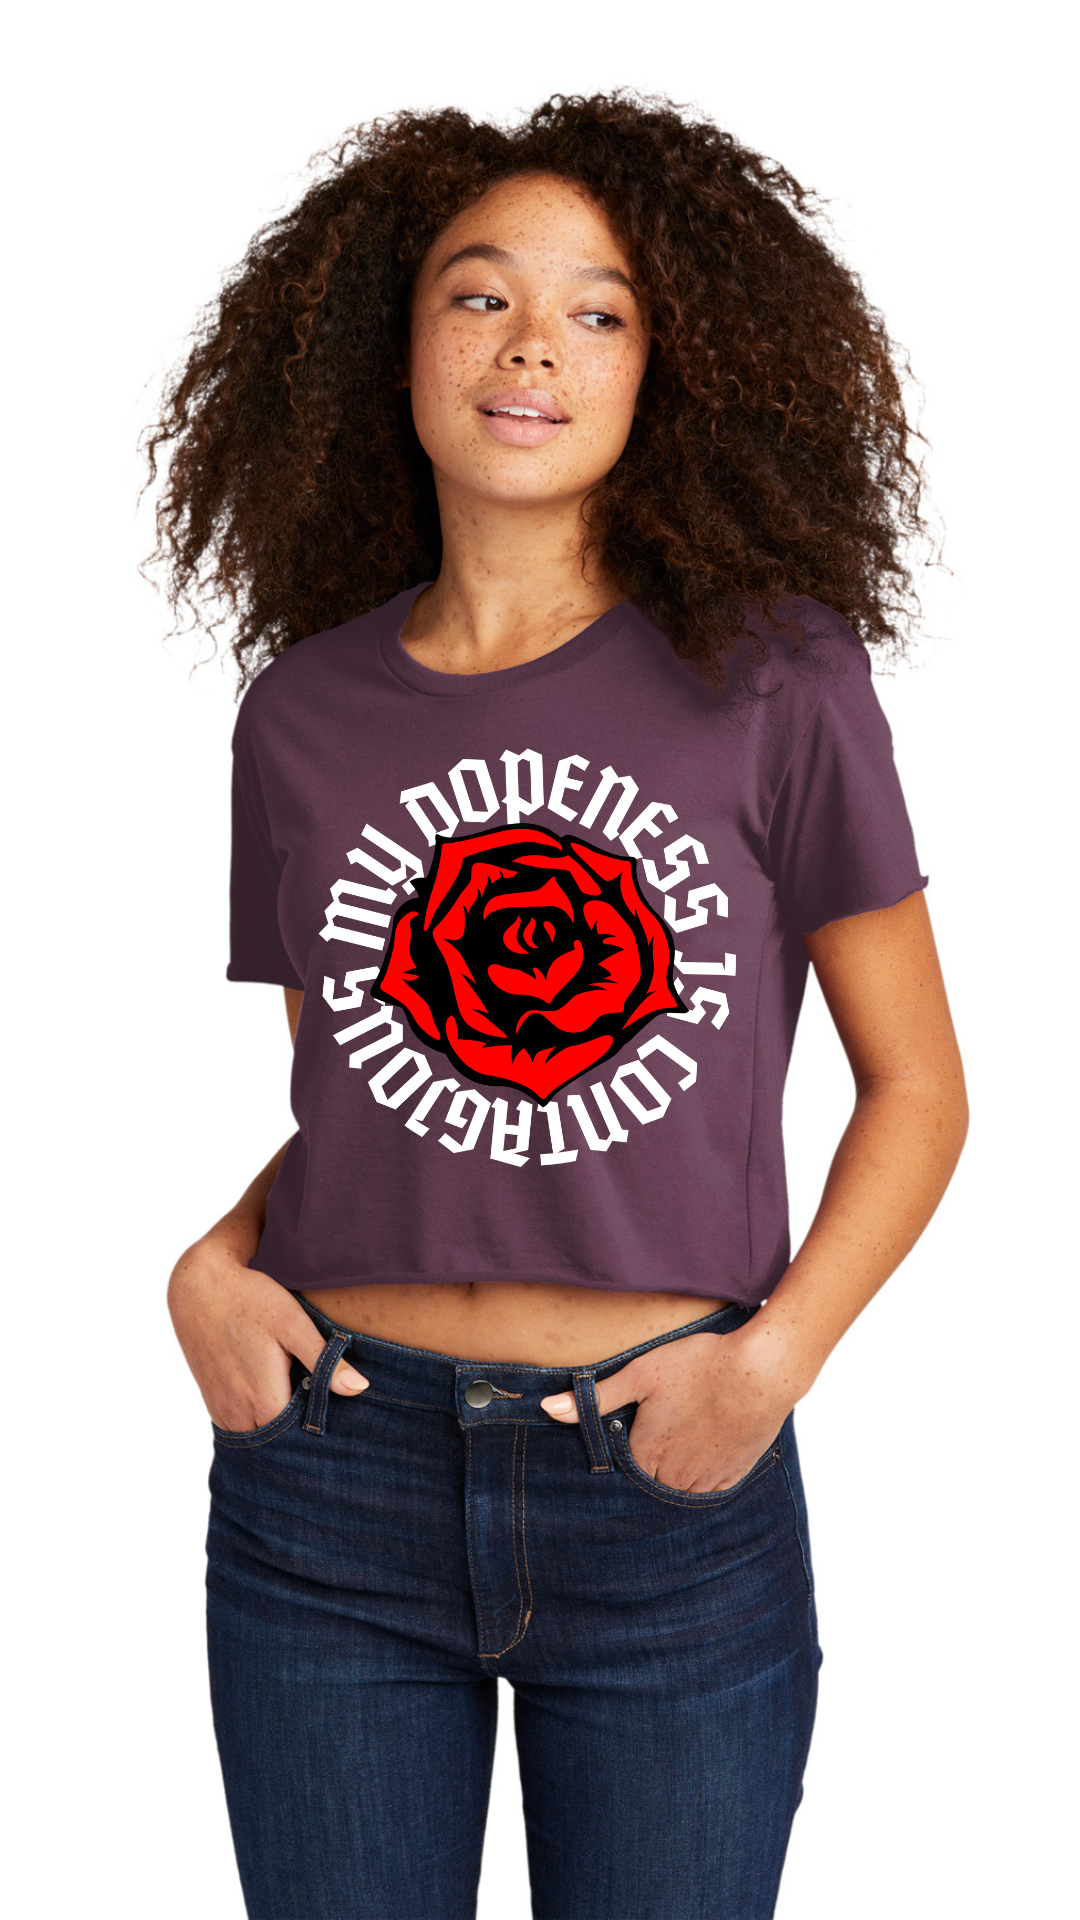 Cali Crop Top Tee - OL Roses White Text